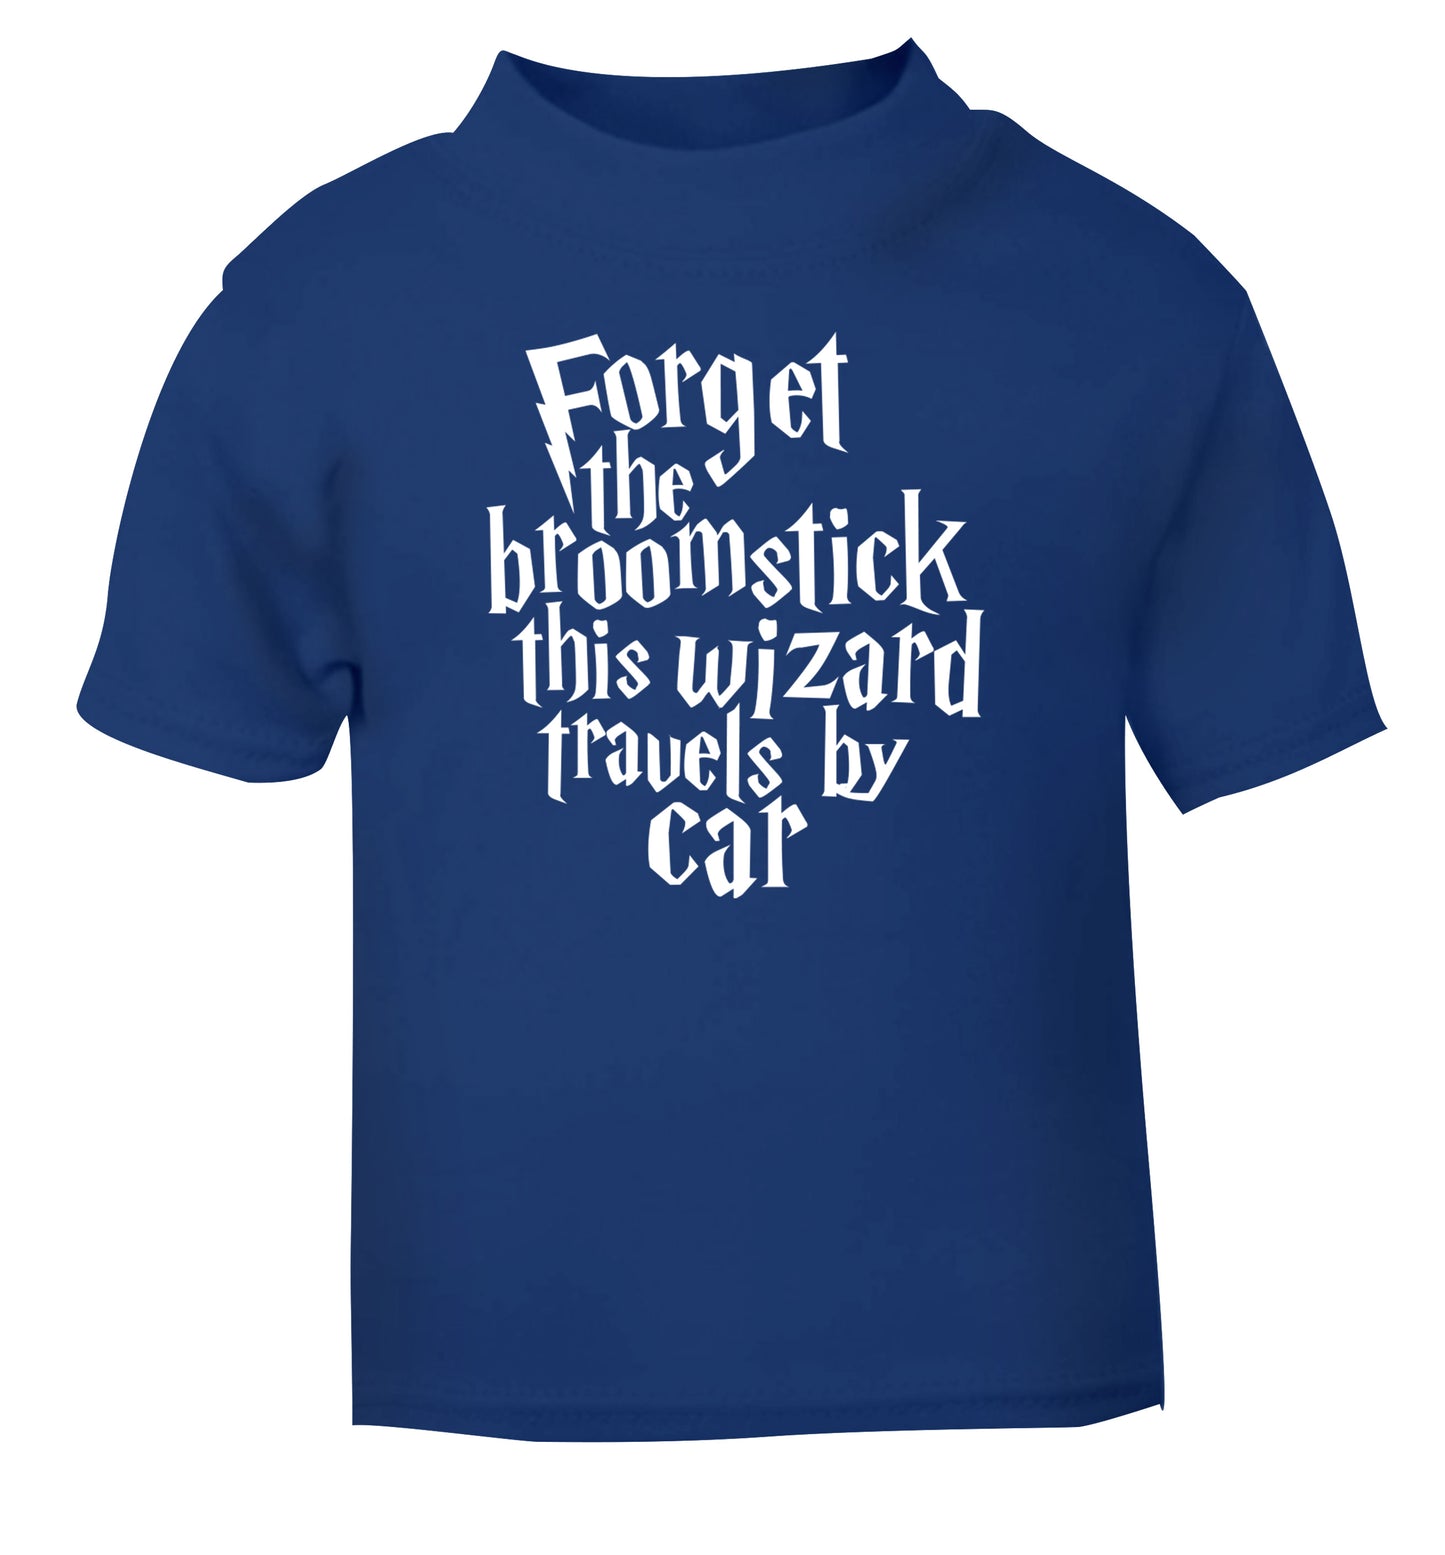 Forget the broomstick this wizard travels by car blue Baby Toddler Tshirt 2 Years